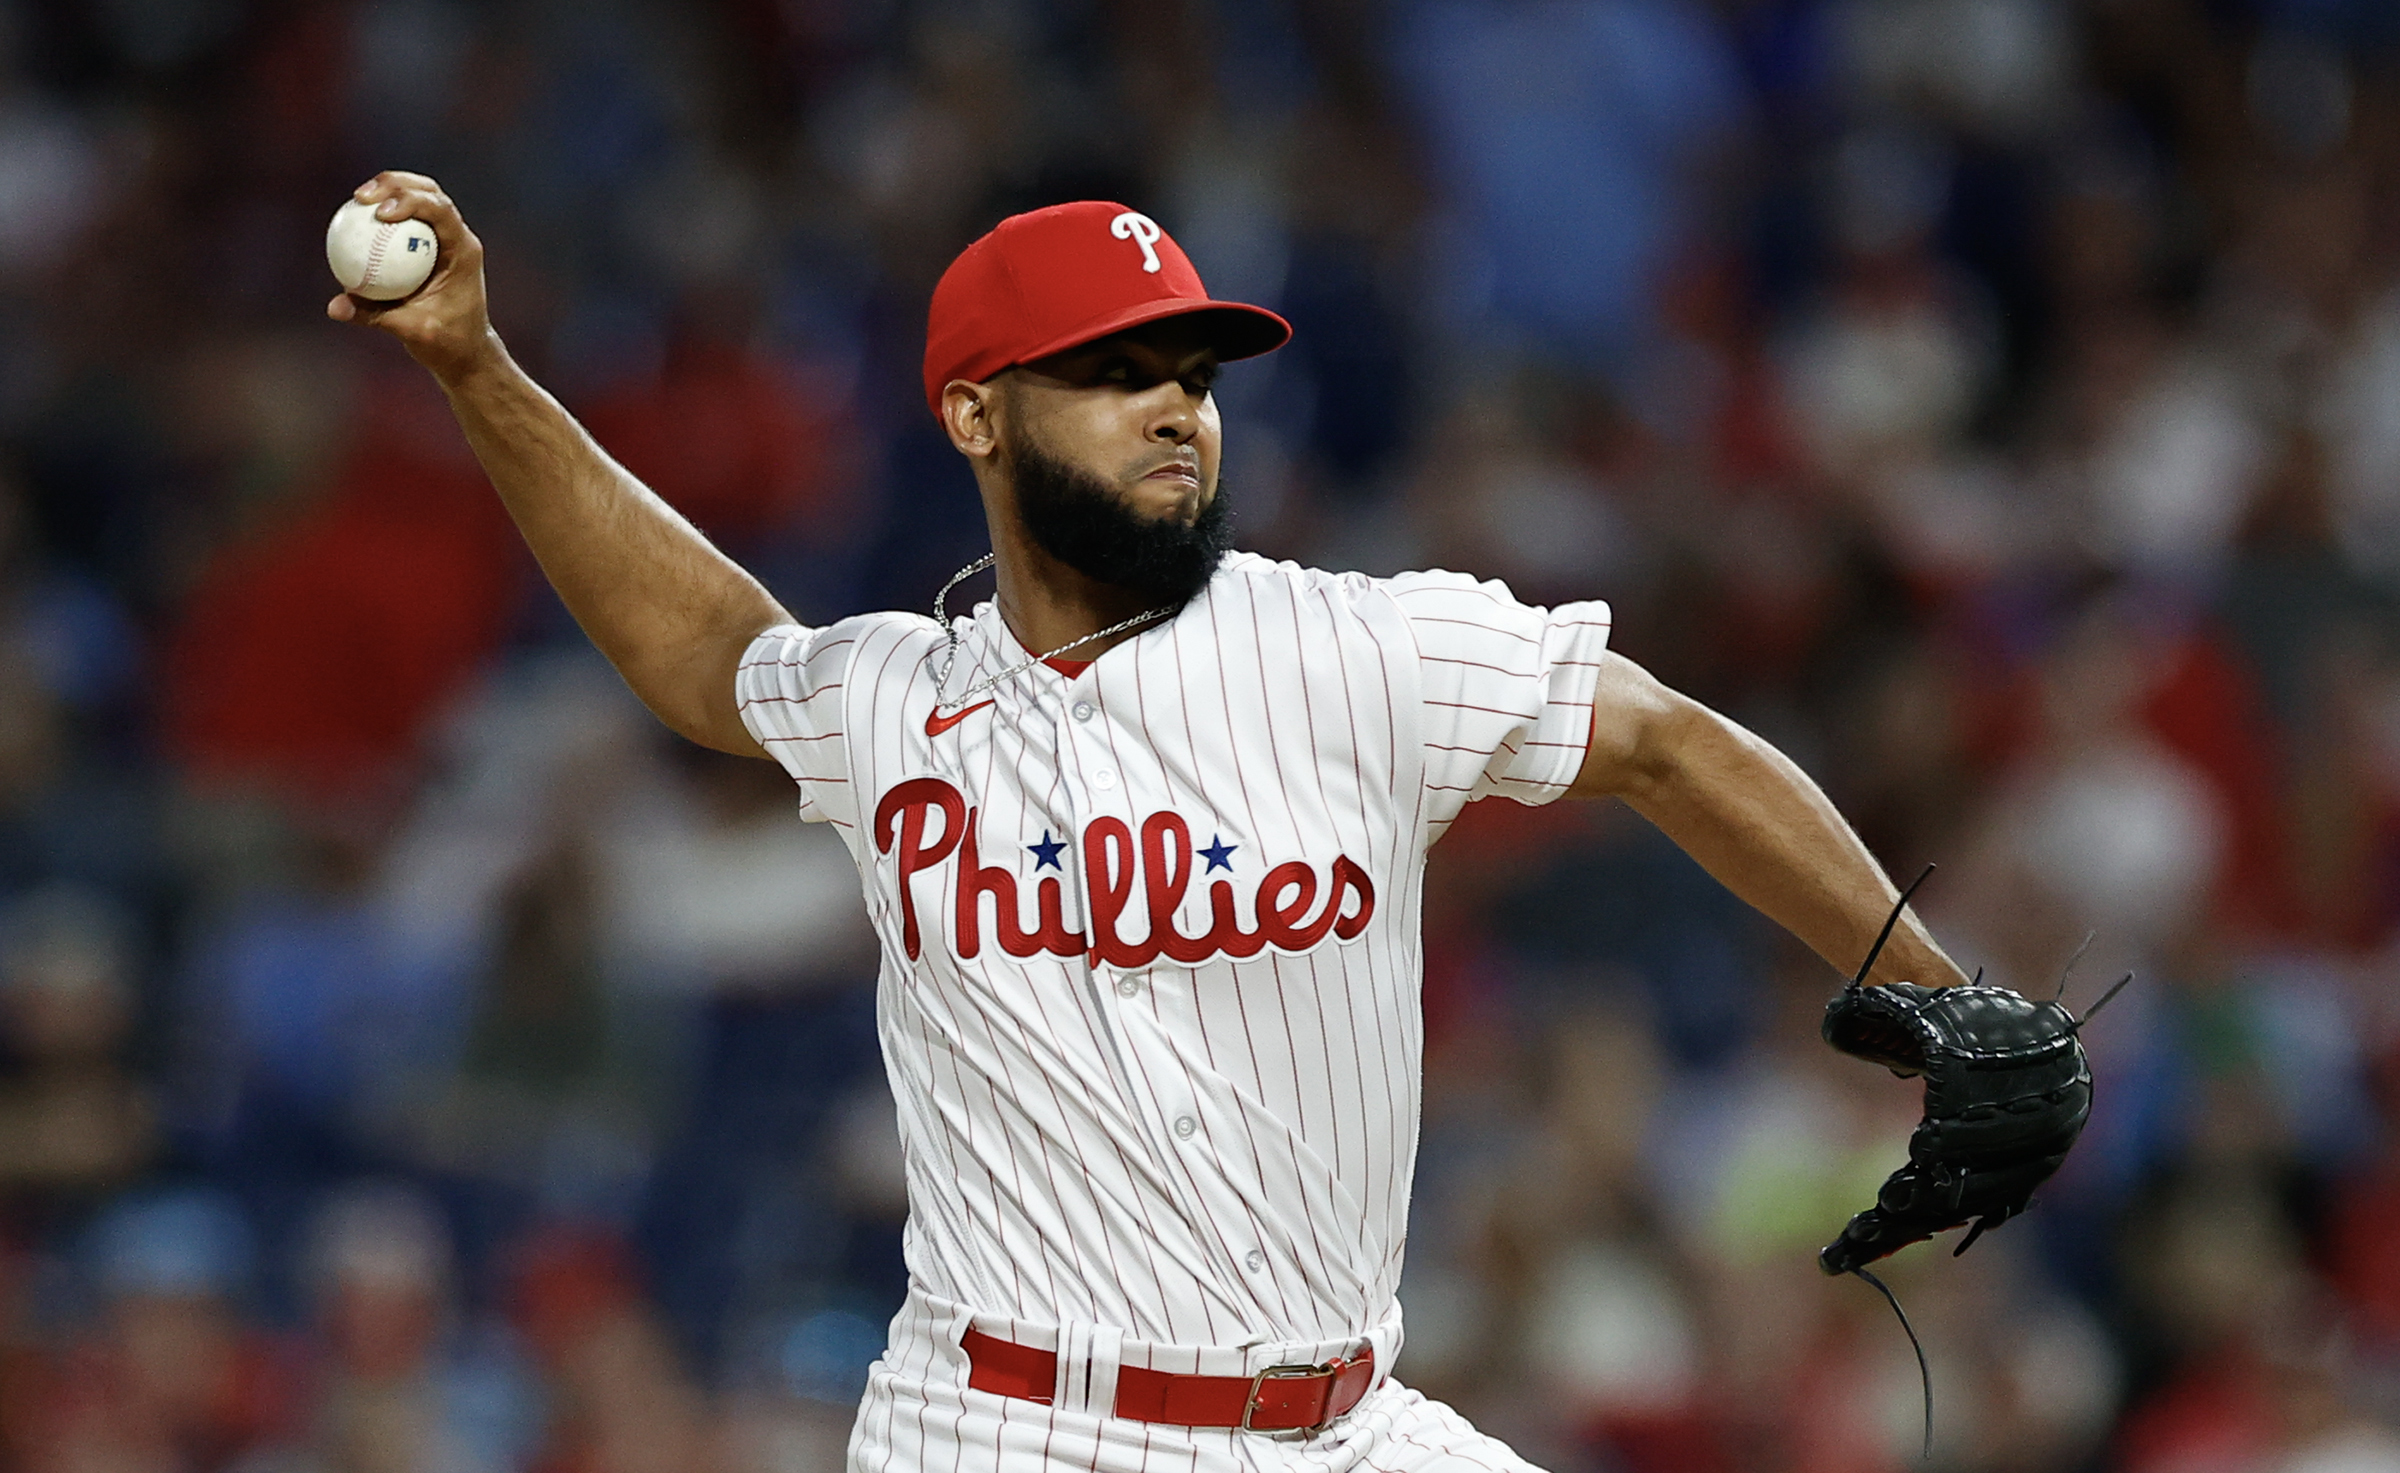 Phillies ace Nola loses no-hitter in seventh, wins game 8-3 over